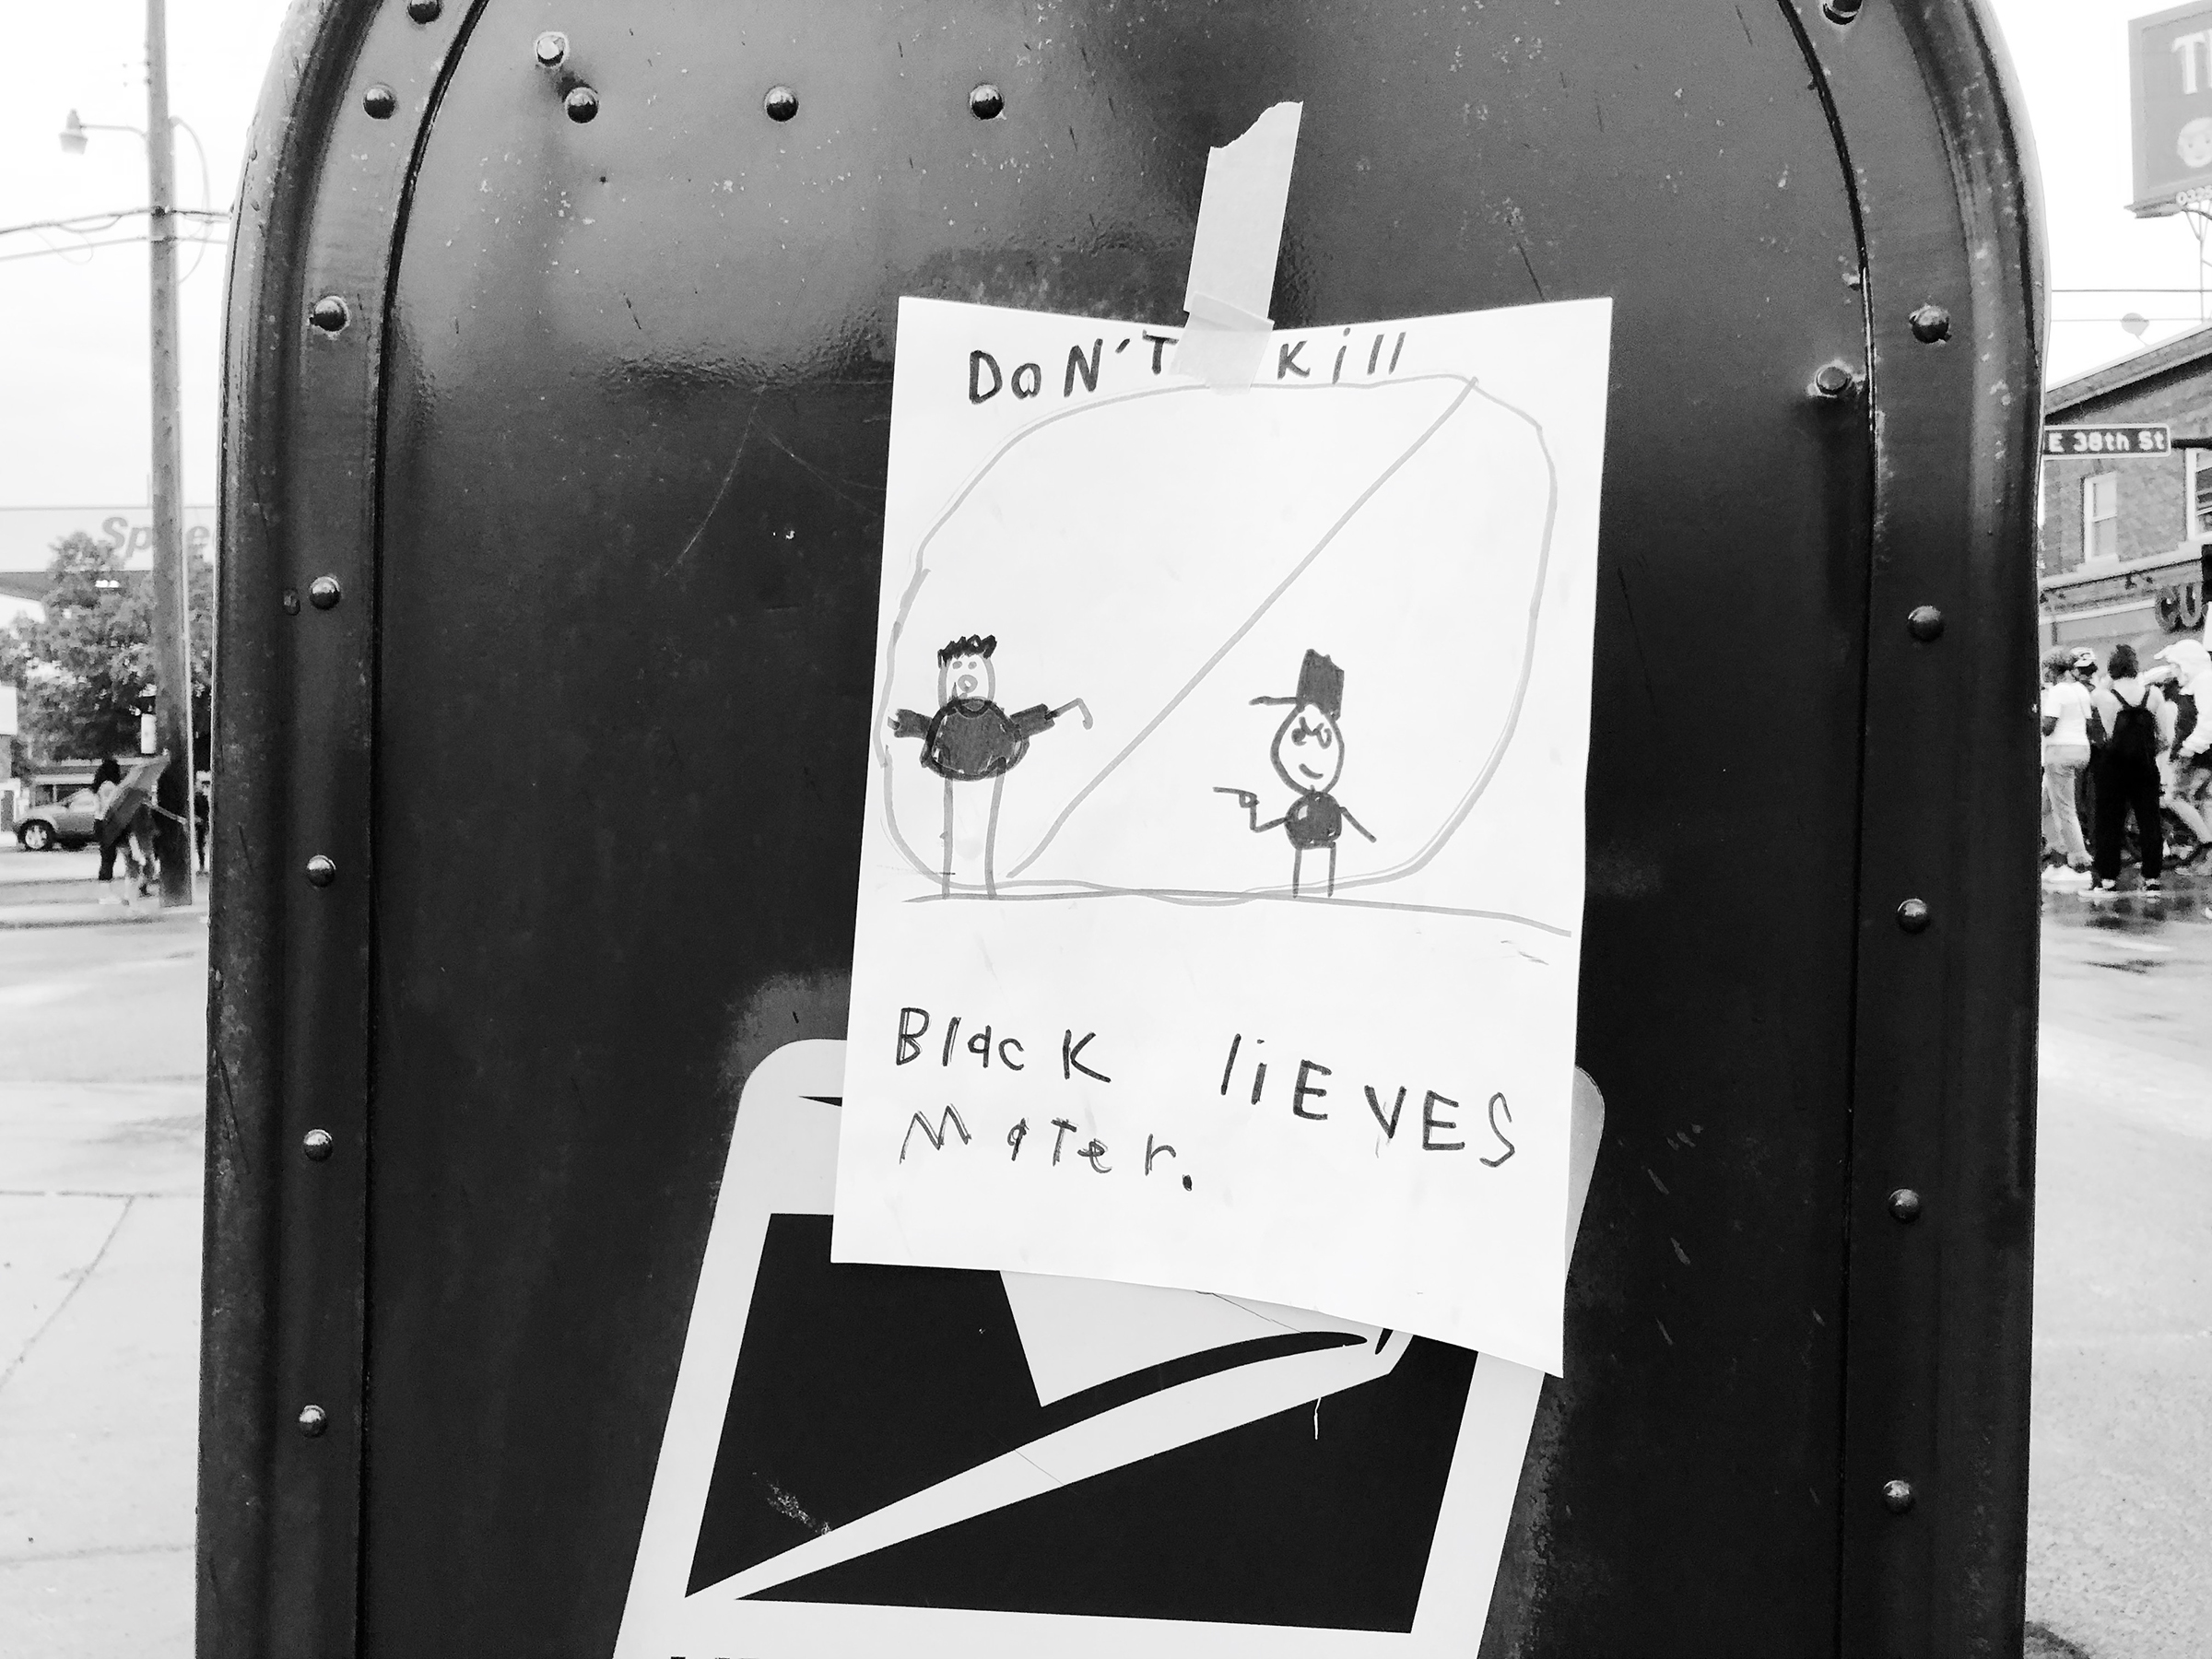 A child's drawing on a mailbox in Minneapolis on May 27.